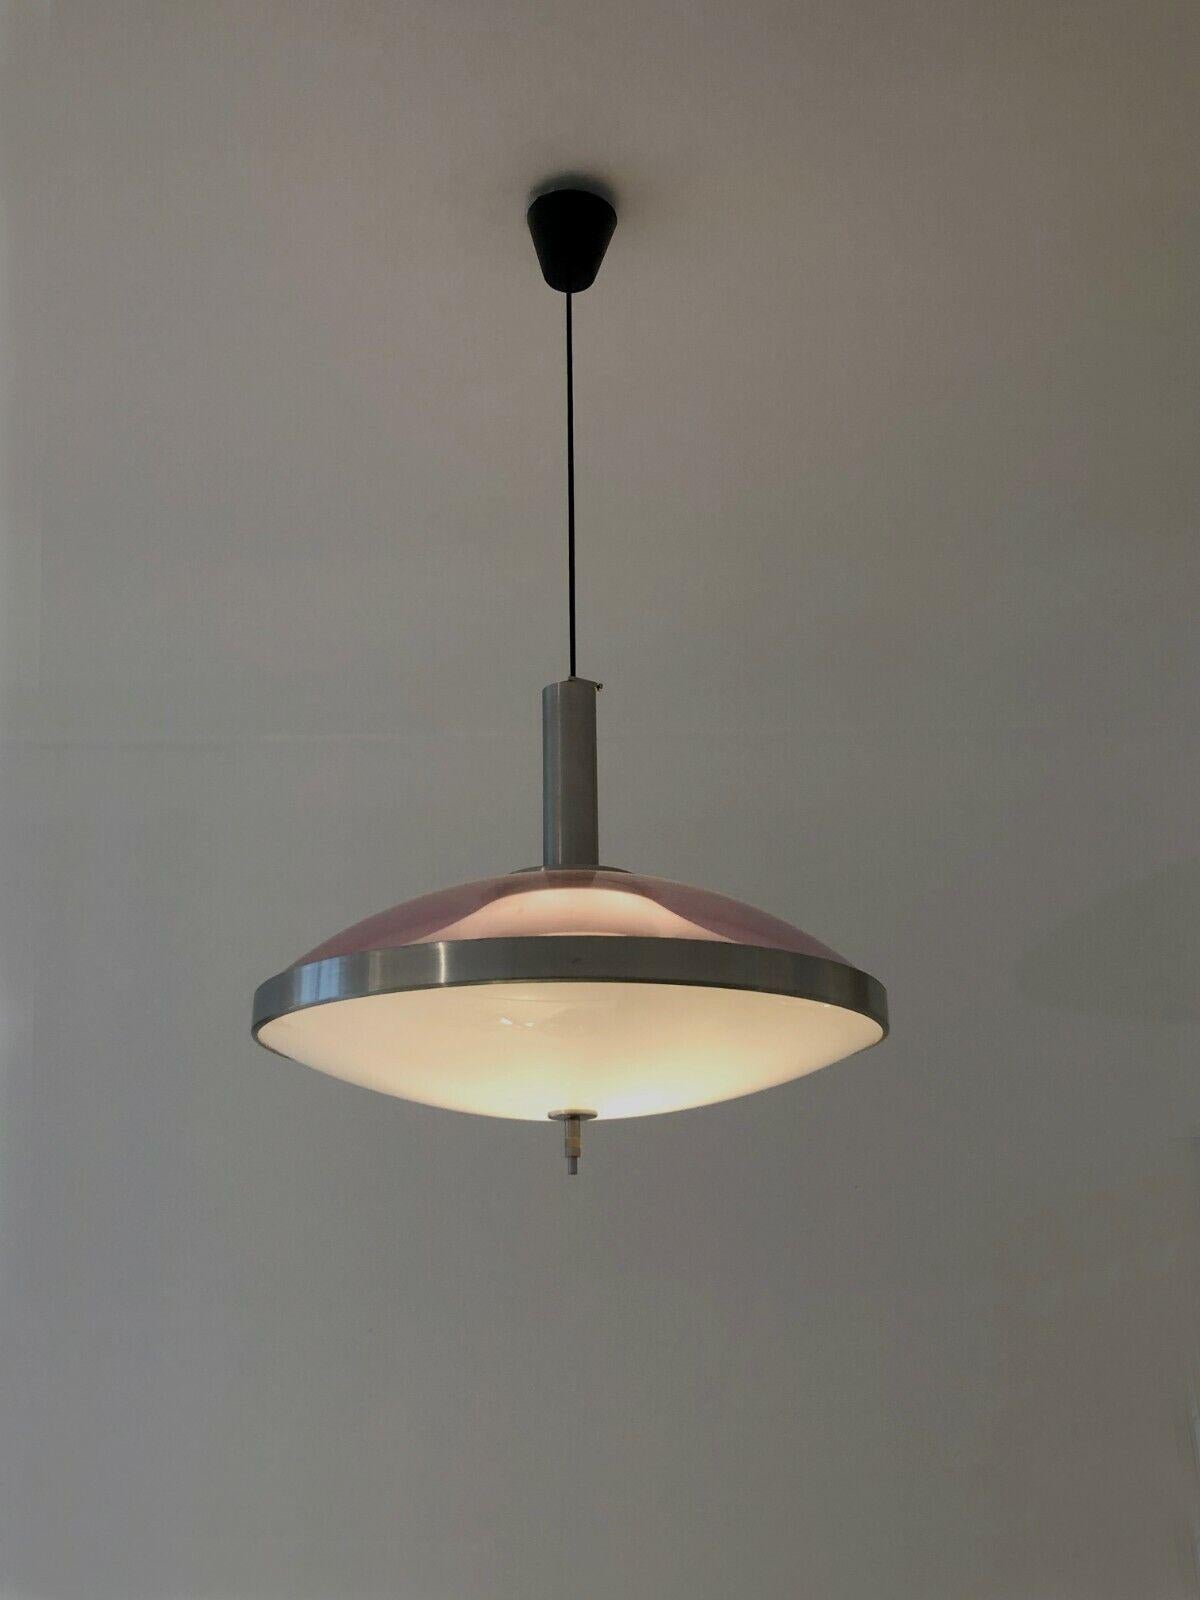 A large and elegant space-inspired chandelier pendant, Modernist, Space-Age, with 2 beams of light (a main white diffusion towards the bottom, a secondary one with pink ambiance towards the top), aluminum structure with integrated switch on the